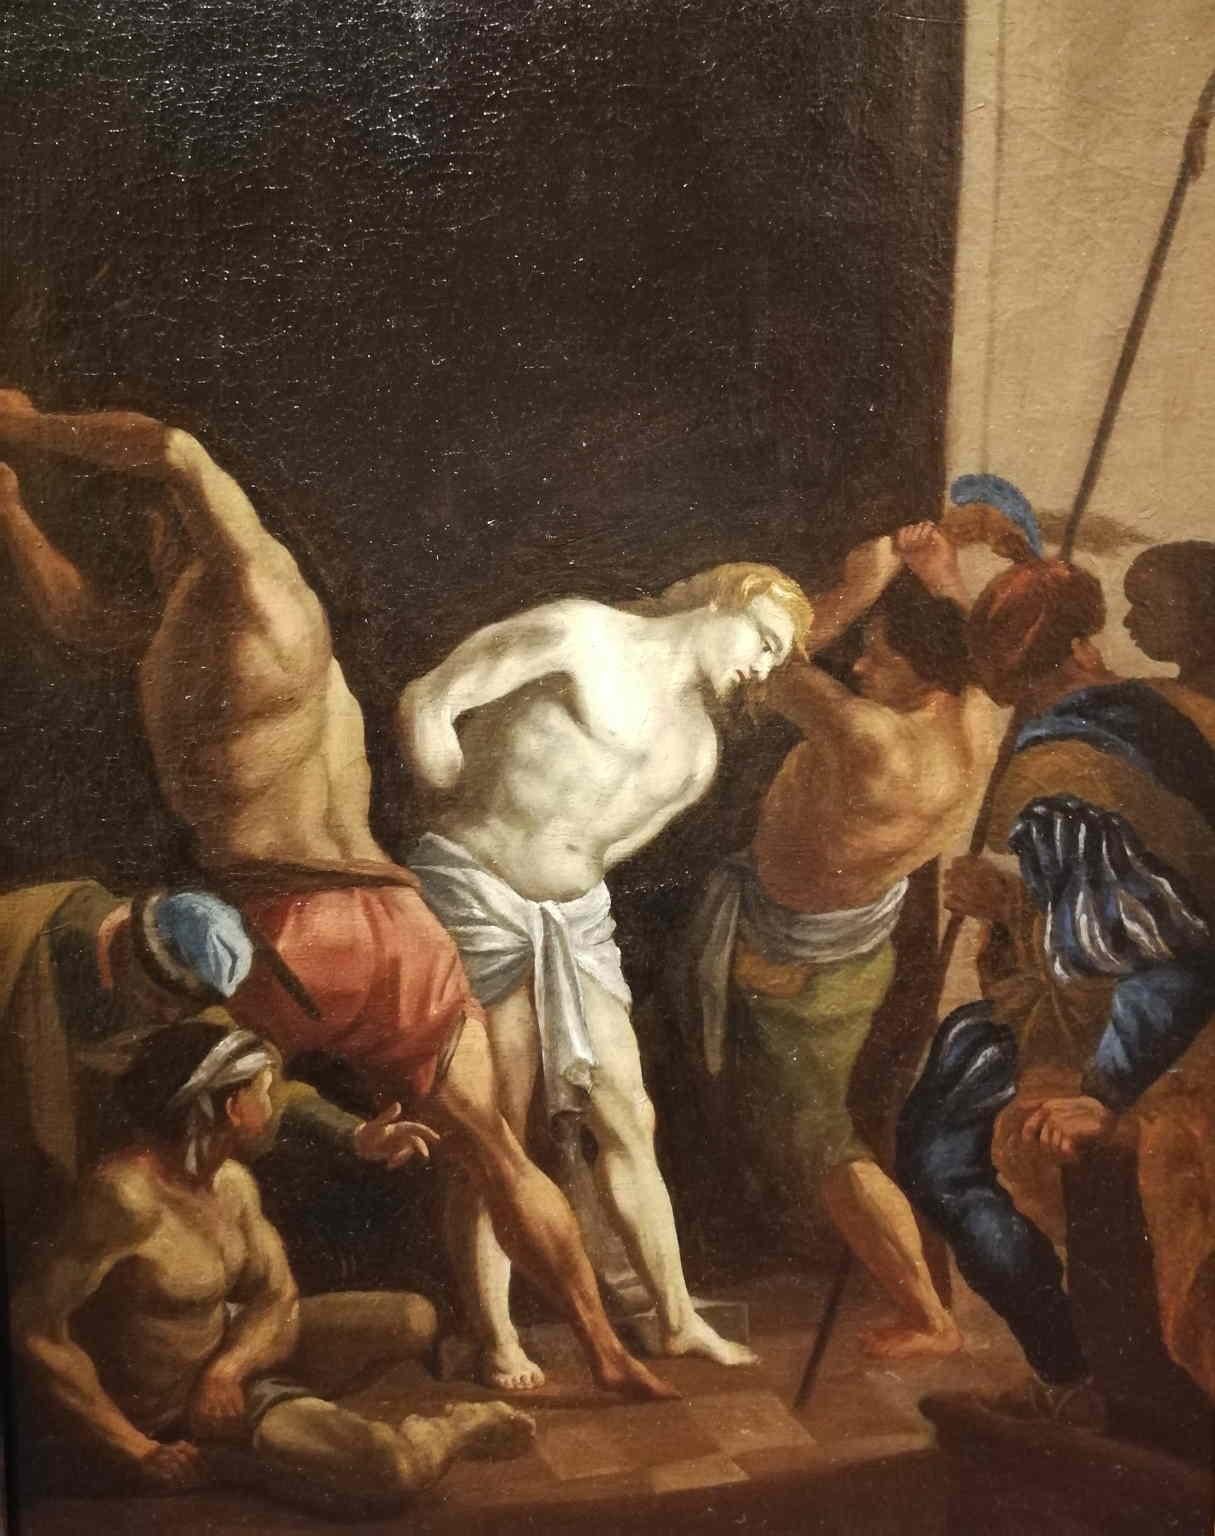 This painting represents the Flagellation by the Romans, an episode of the Passion of Christ that is mentioned in three of the Gospels: John, Mark and Matthew, and that was the usual prelude to crucifixion under Roman law.
At the center of the scene